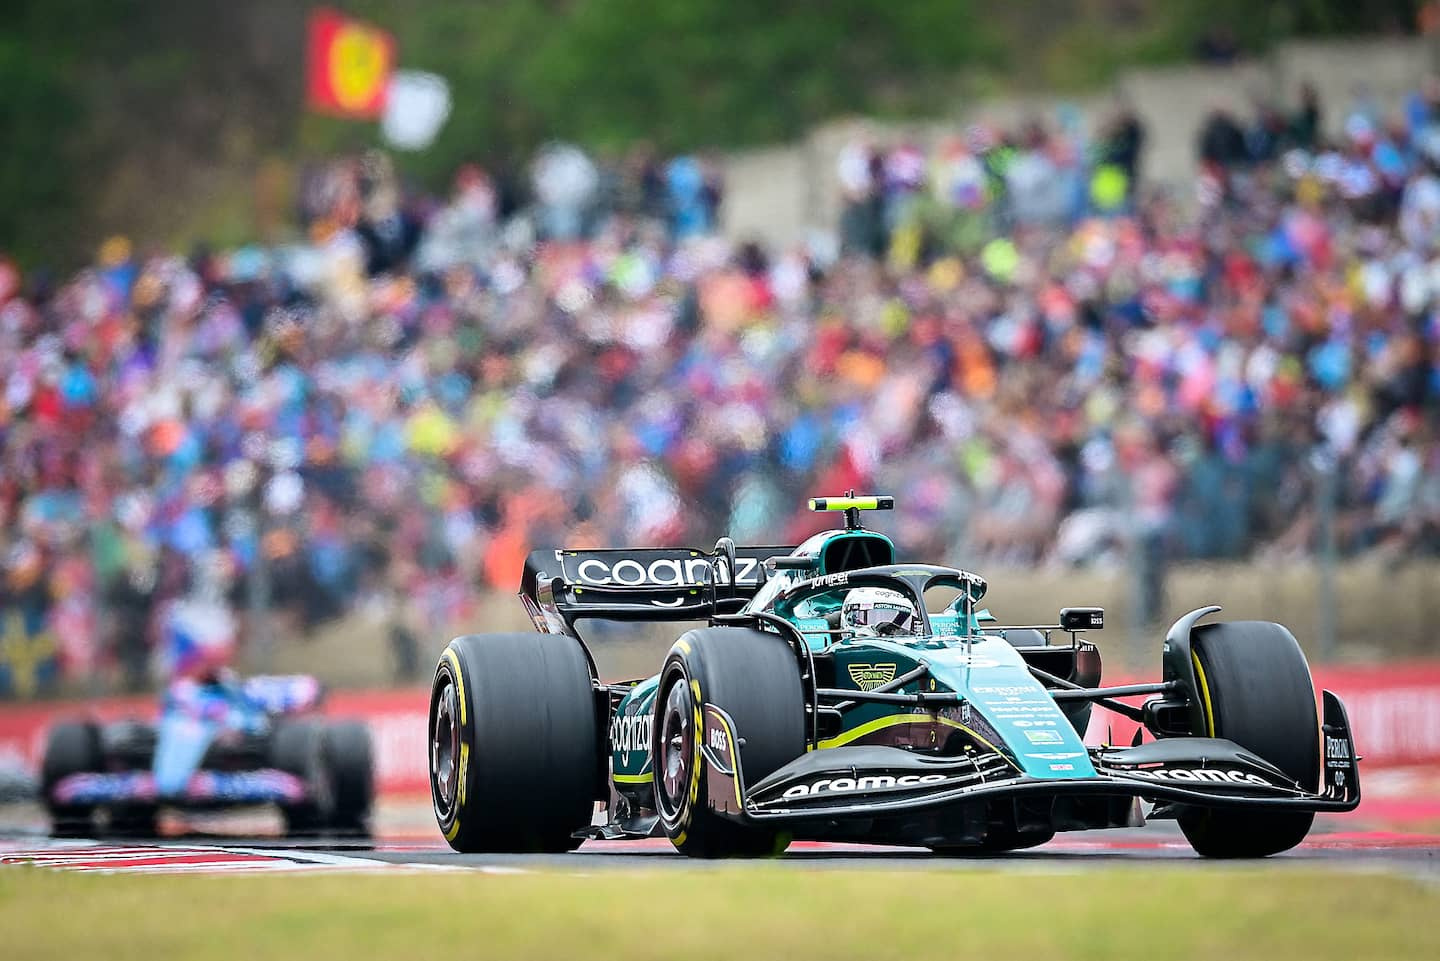 F1 | Hungarian Grand Prix: The roles are reversed at Aston Martin